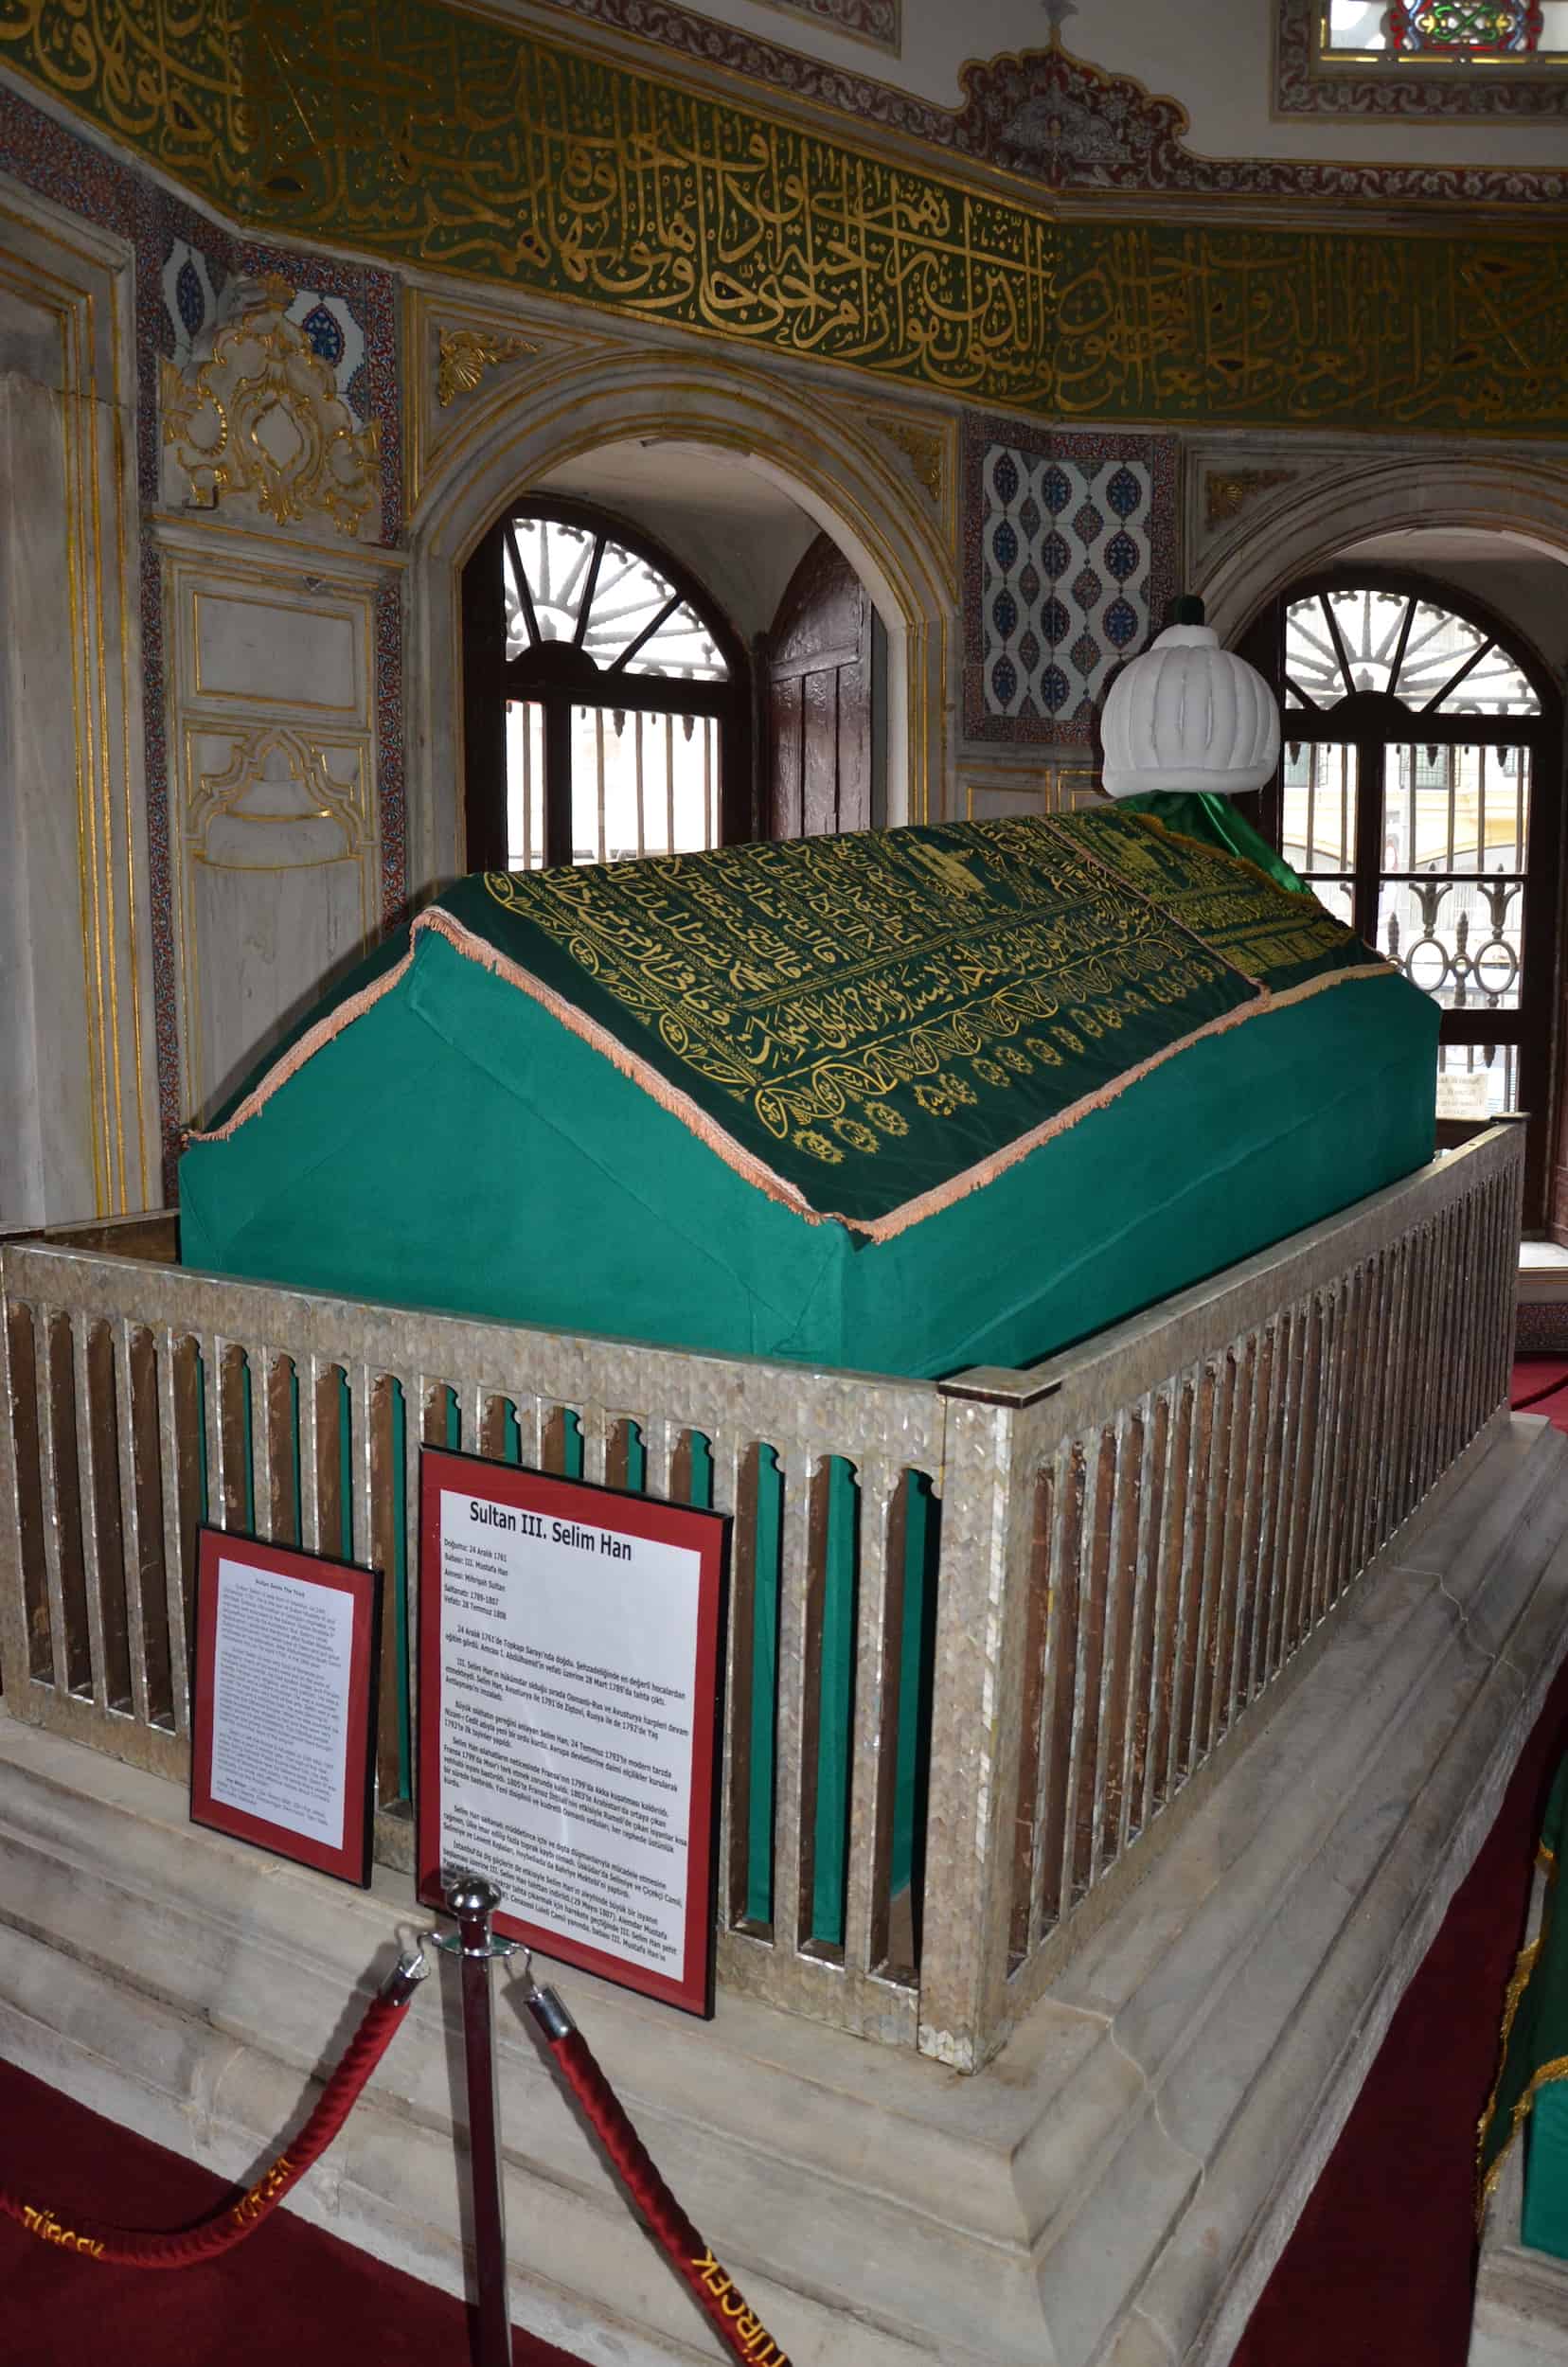 Sarcophagus of Selim III in the Tomb of Mustafa III at the Laleli Mosque in Istanbul, Turkey